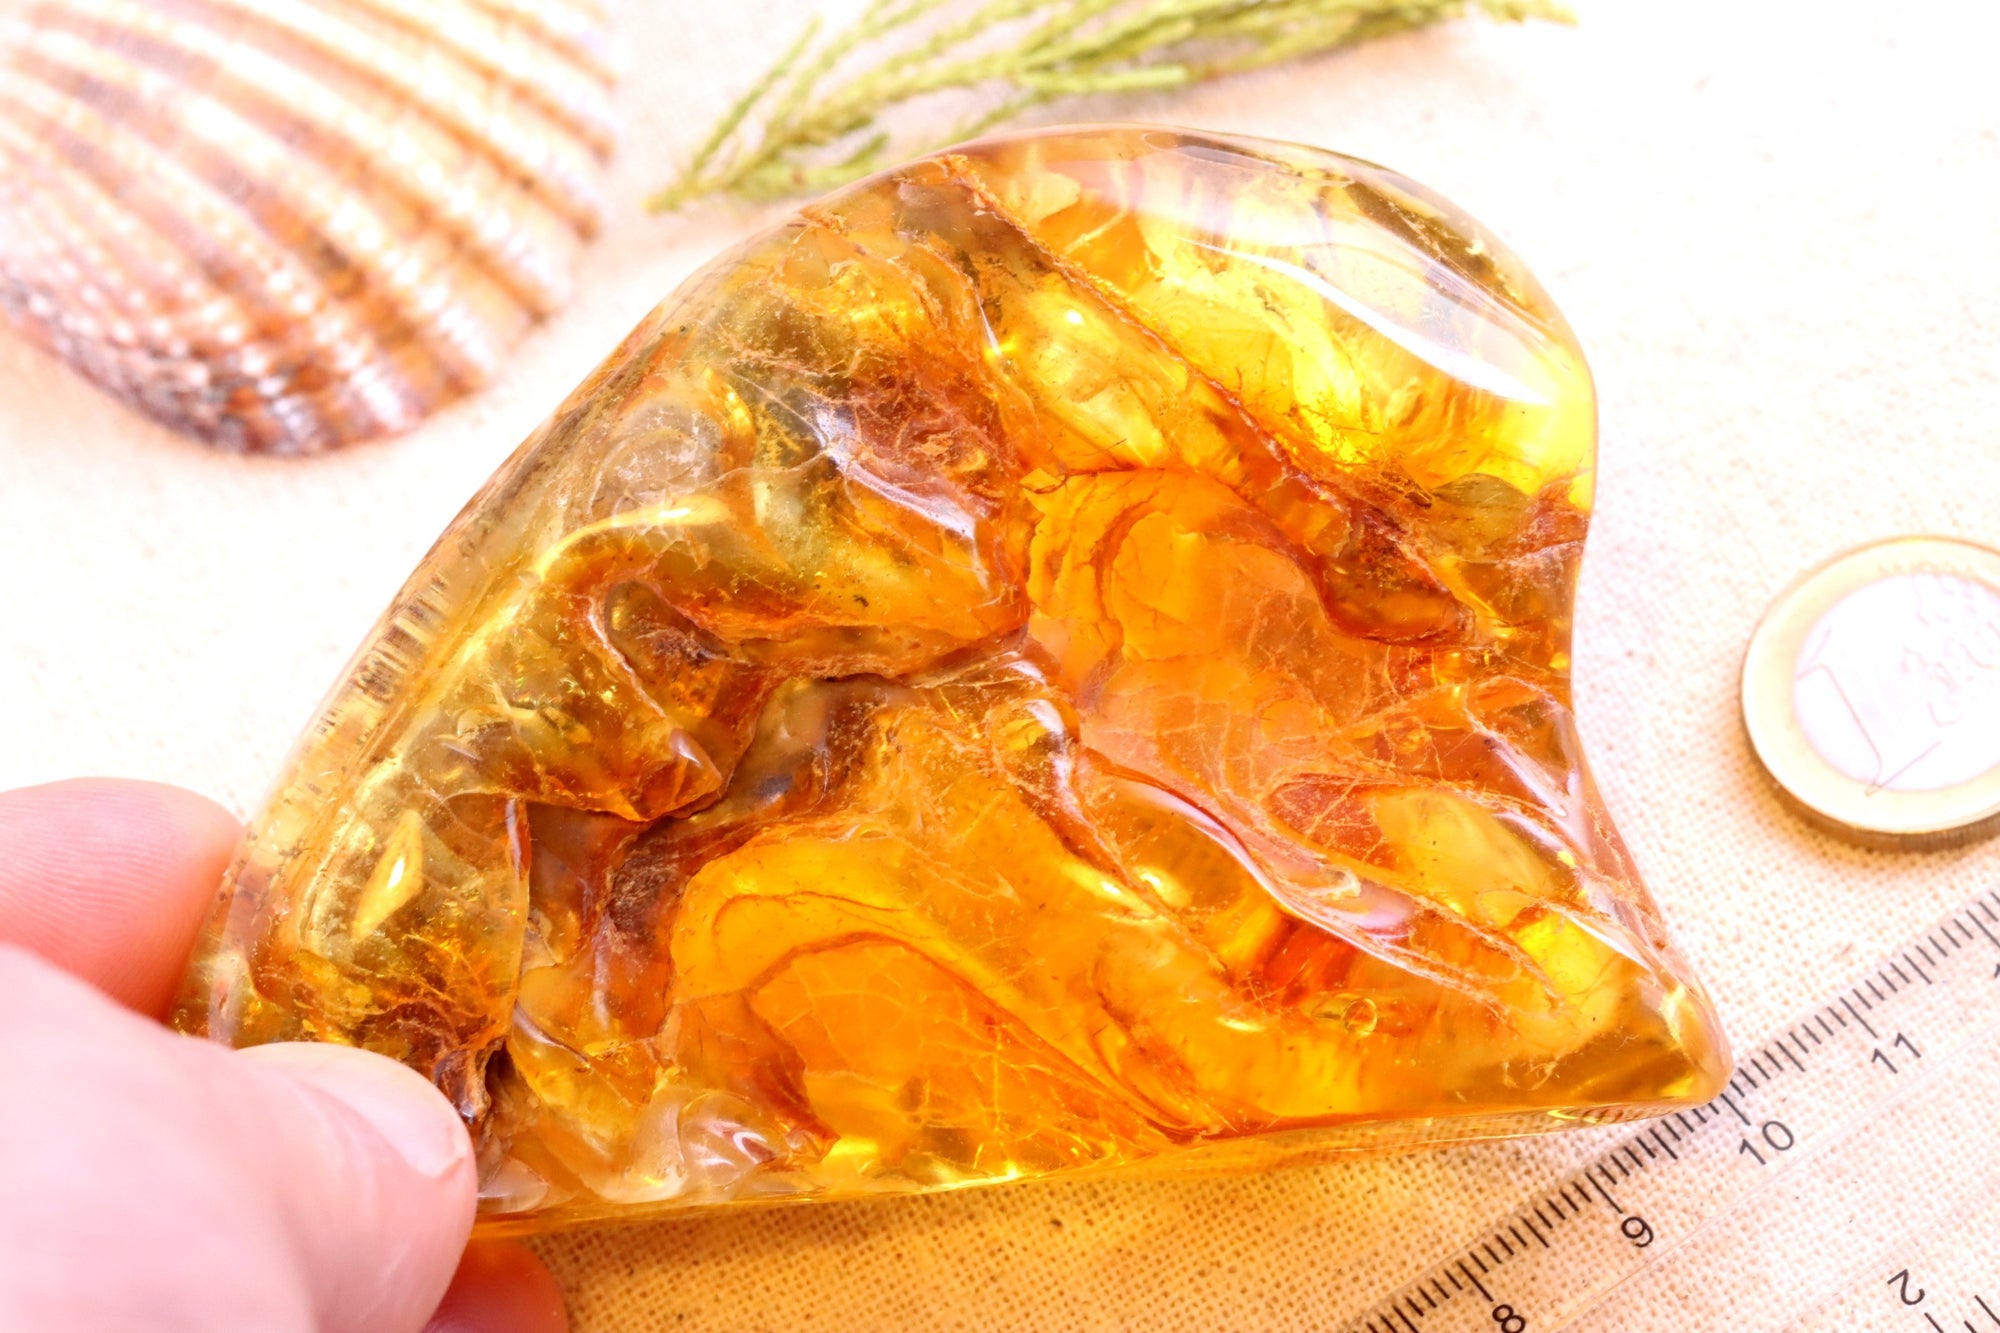 Unbelievable Large 117.9g Amber Stone Collector's Gem